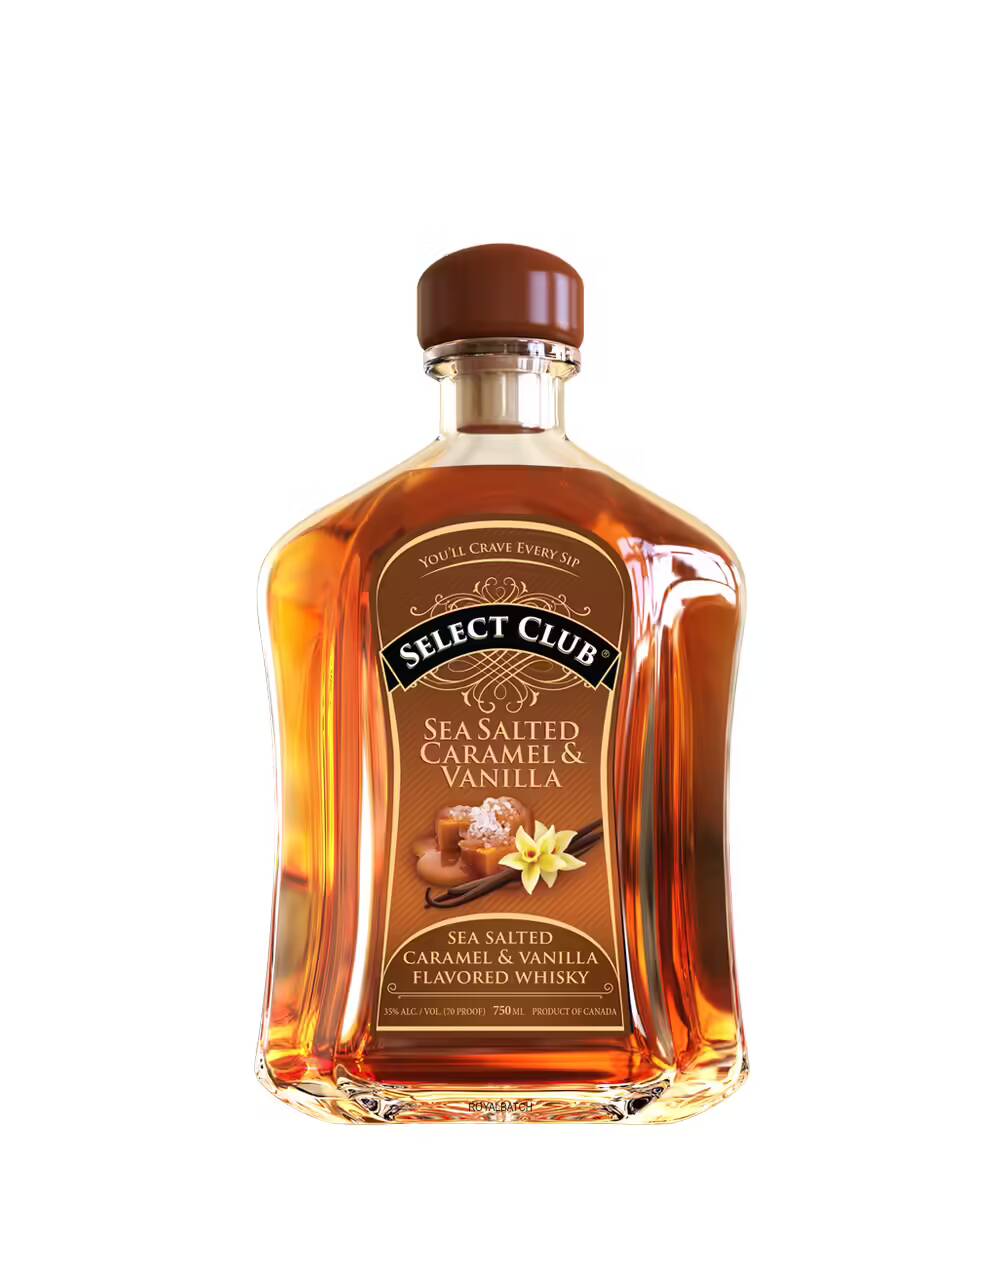 Select Club Sea Salted Caramel and Vanilla Flavored Whisky